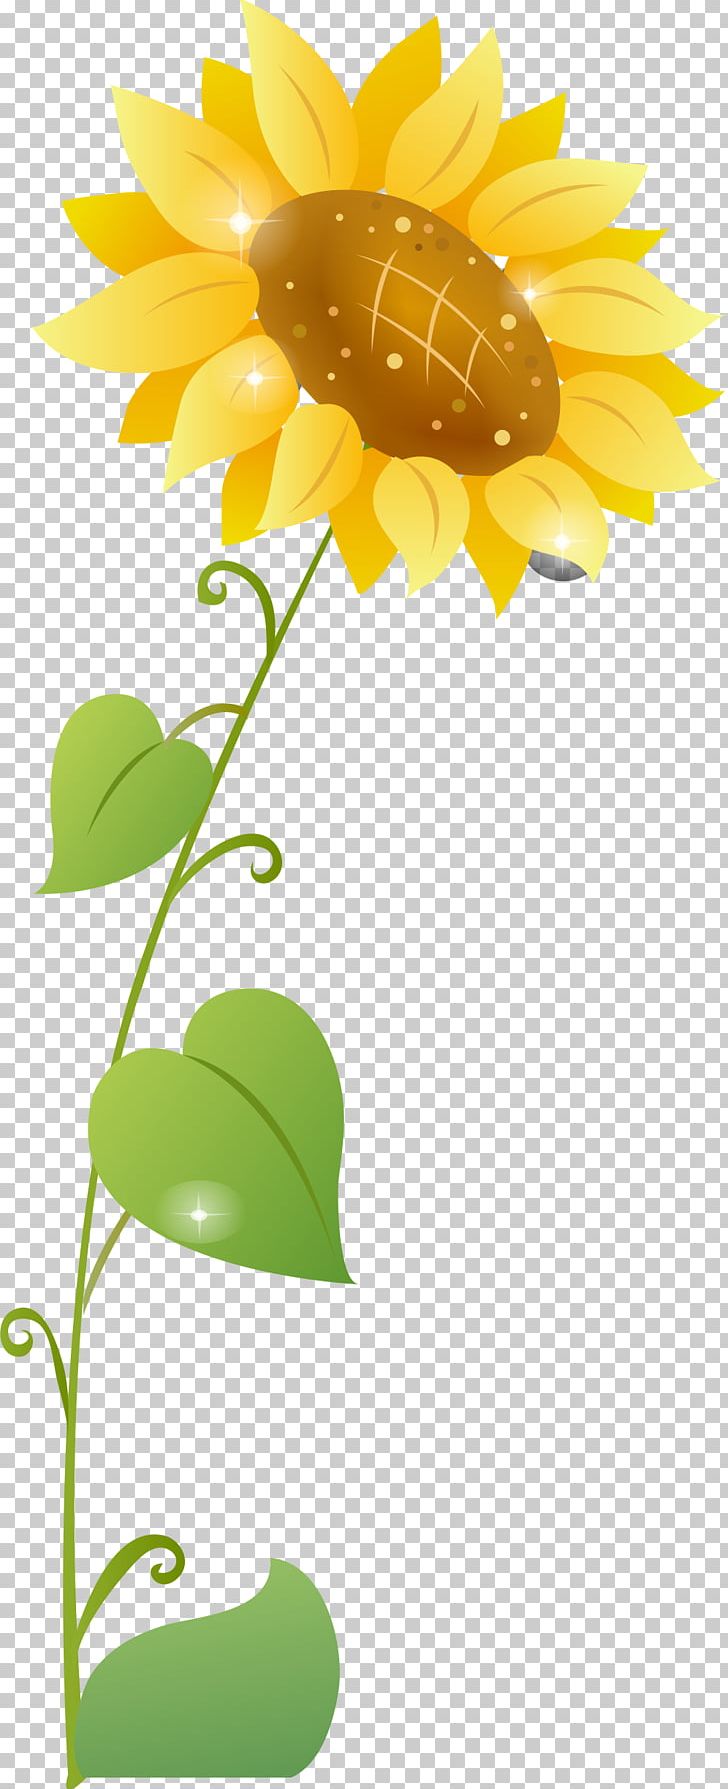 Common Sunflower Cartoon PNG, Clipart, Art, Balloon Cartoon, Cartoon, Cartoon Arms, Cartoon Character Free PNG Download